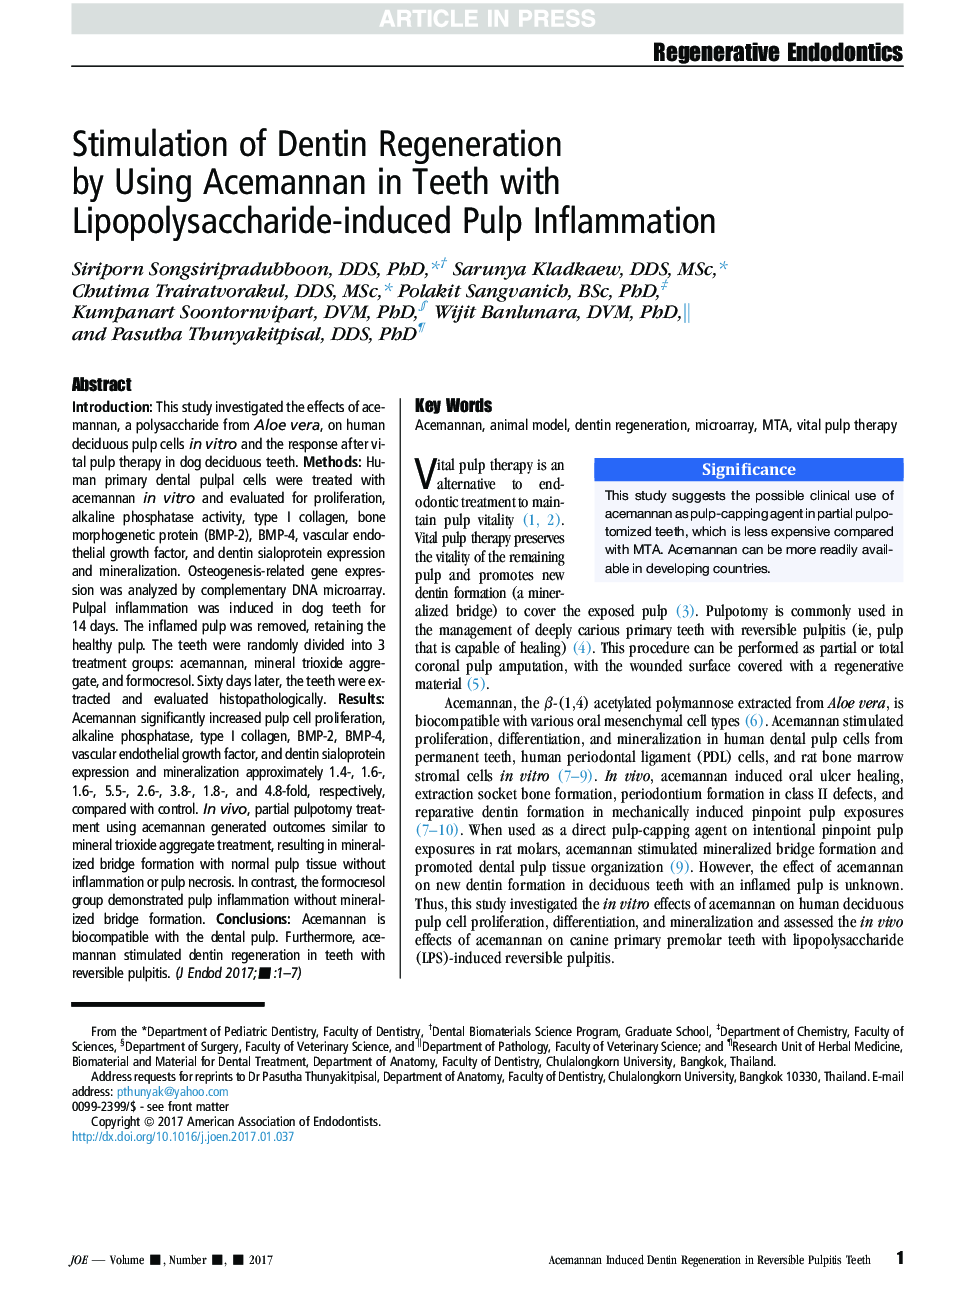 Stimulation of Dentin Regeneration by Using Acemannan in Teeth with Lipopolysaccharide-induced Pulp Inflammation